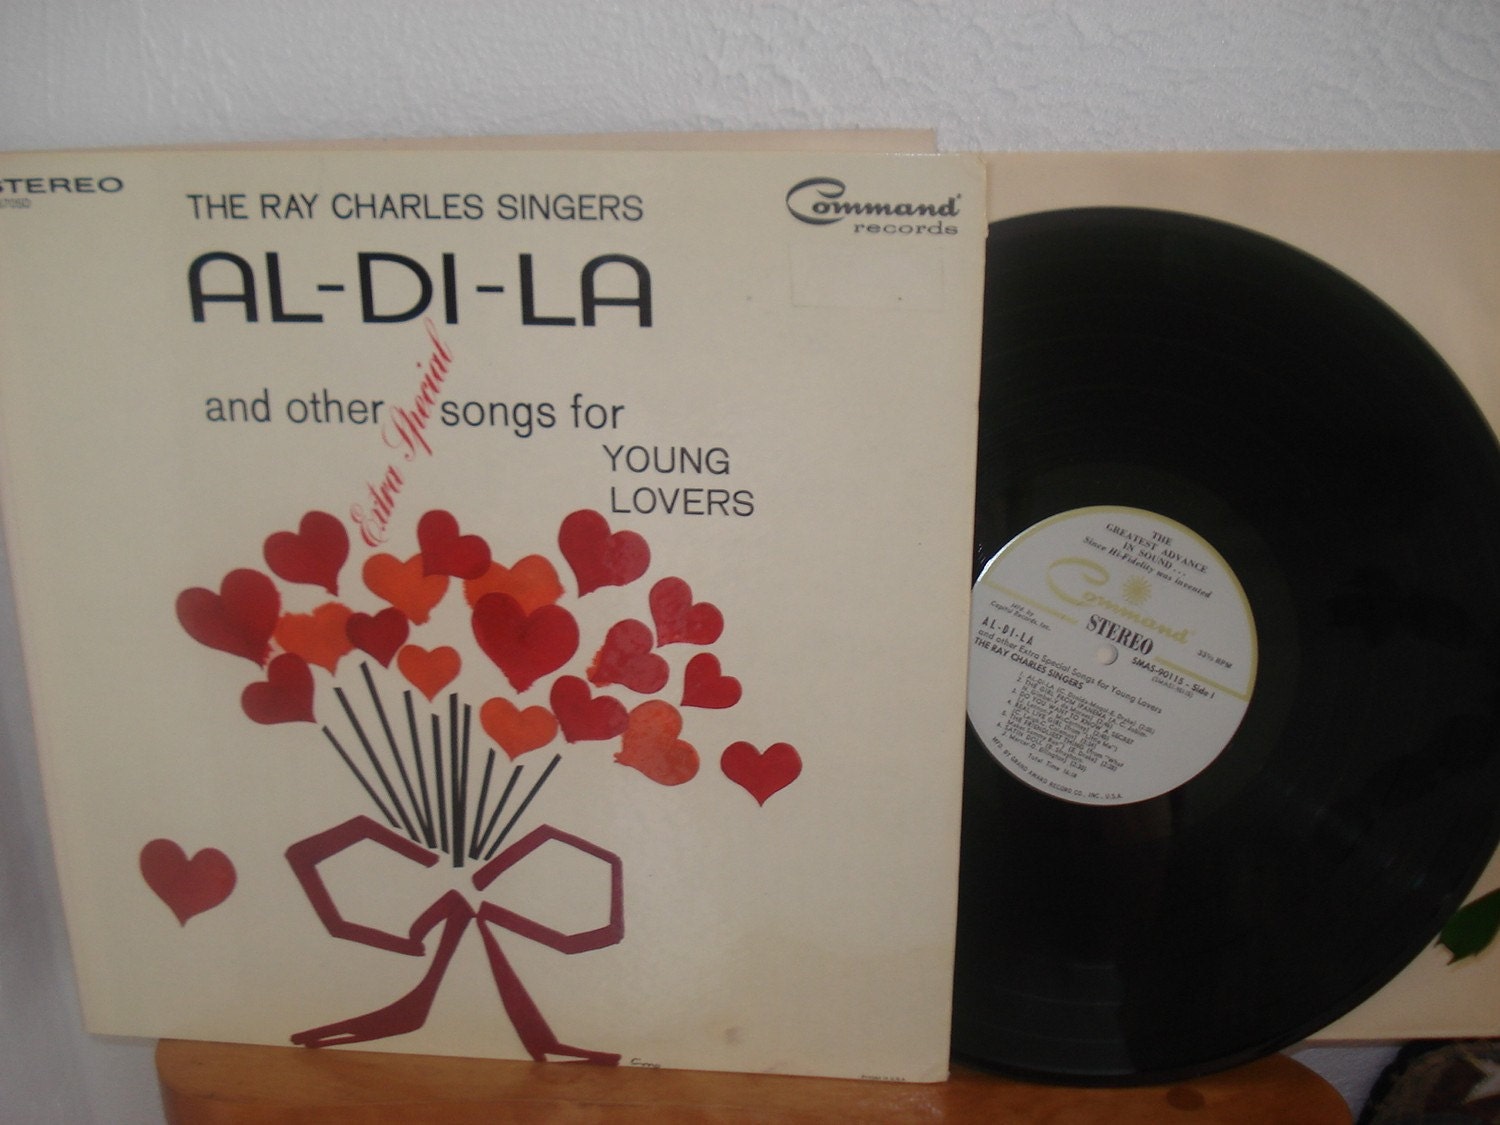 Ray Charles Singers Al-Di-La Songs for Young Lovers Command Records Vintage Vinyl LP